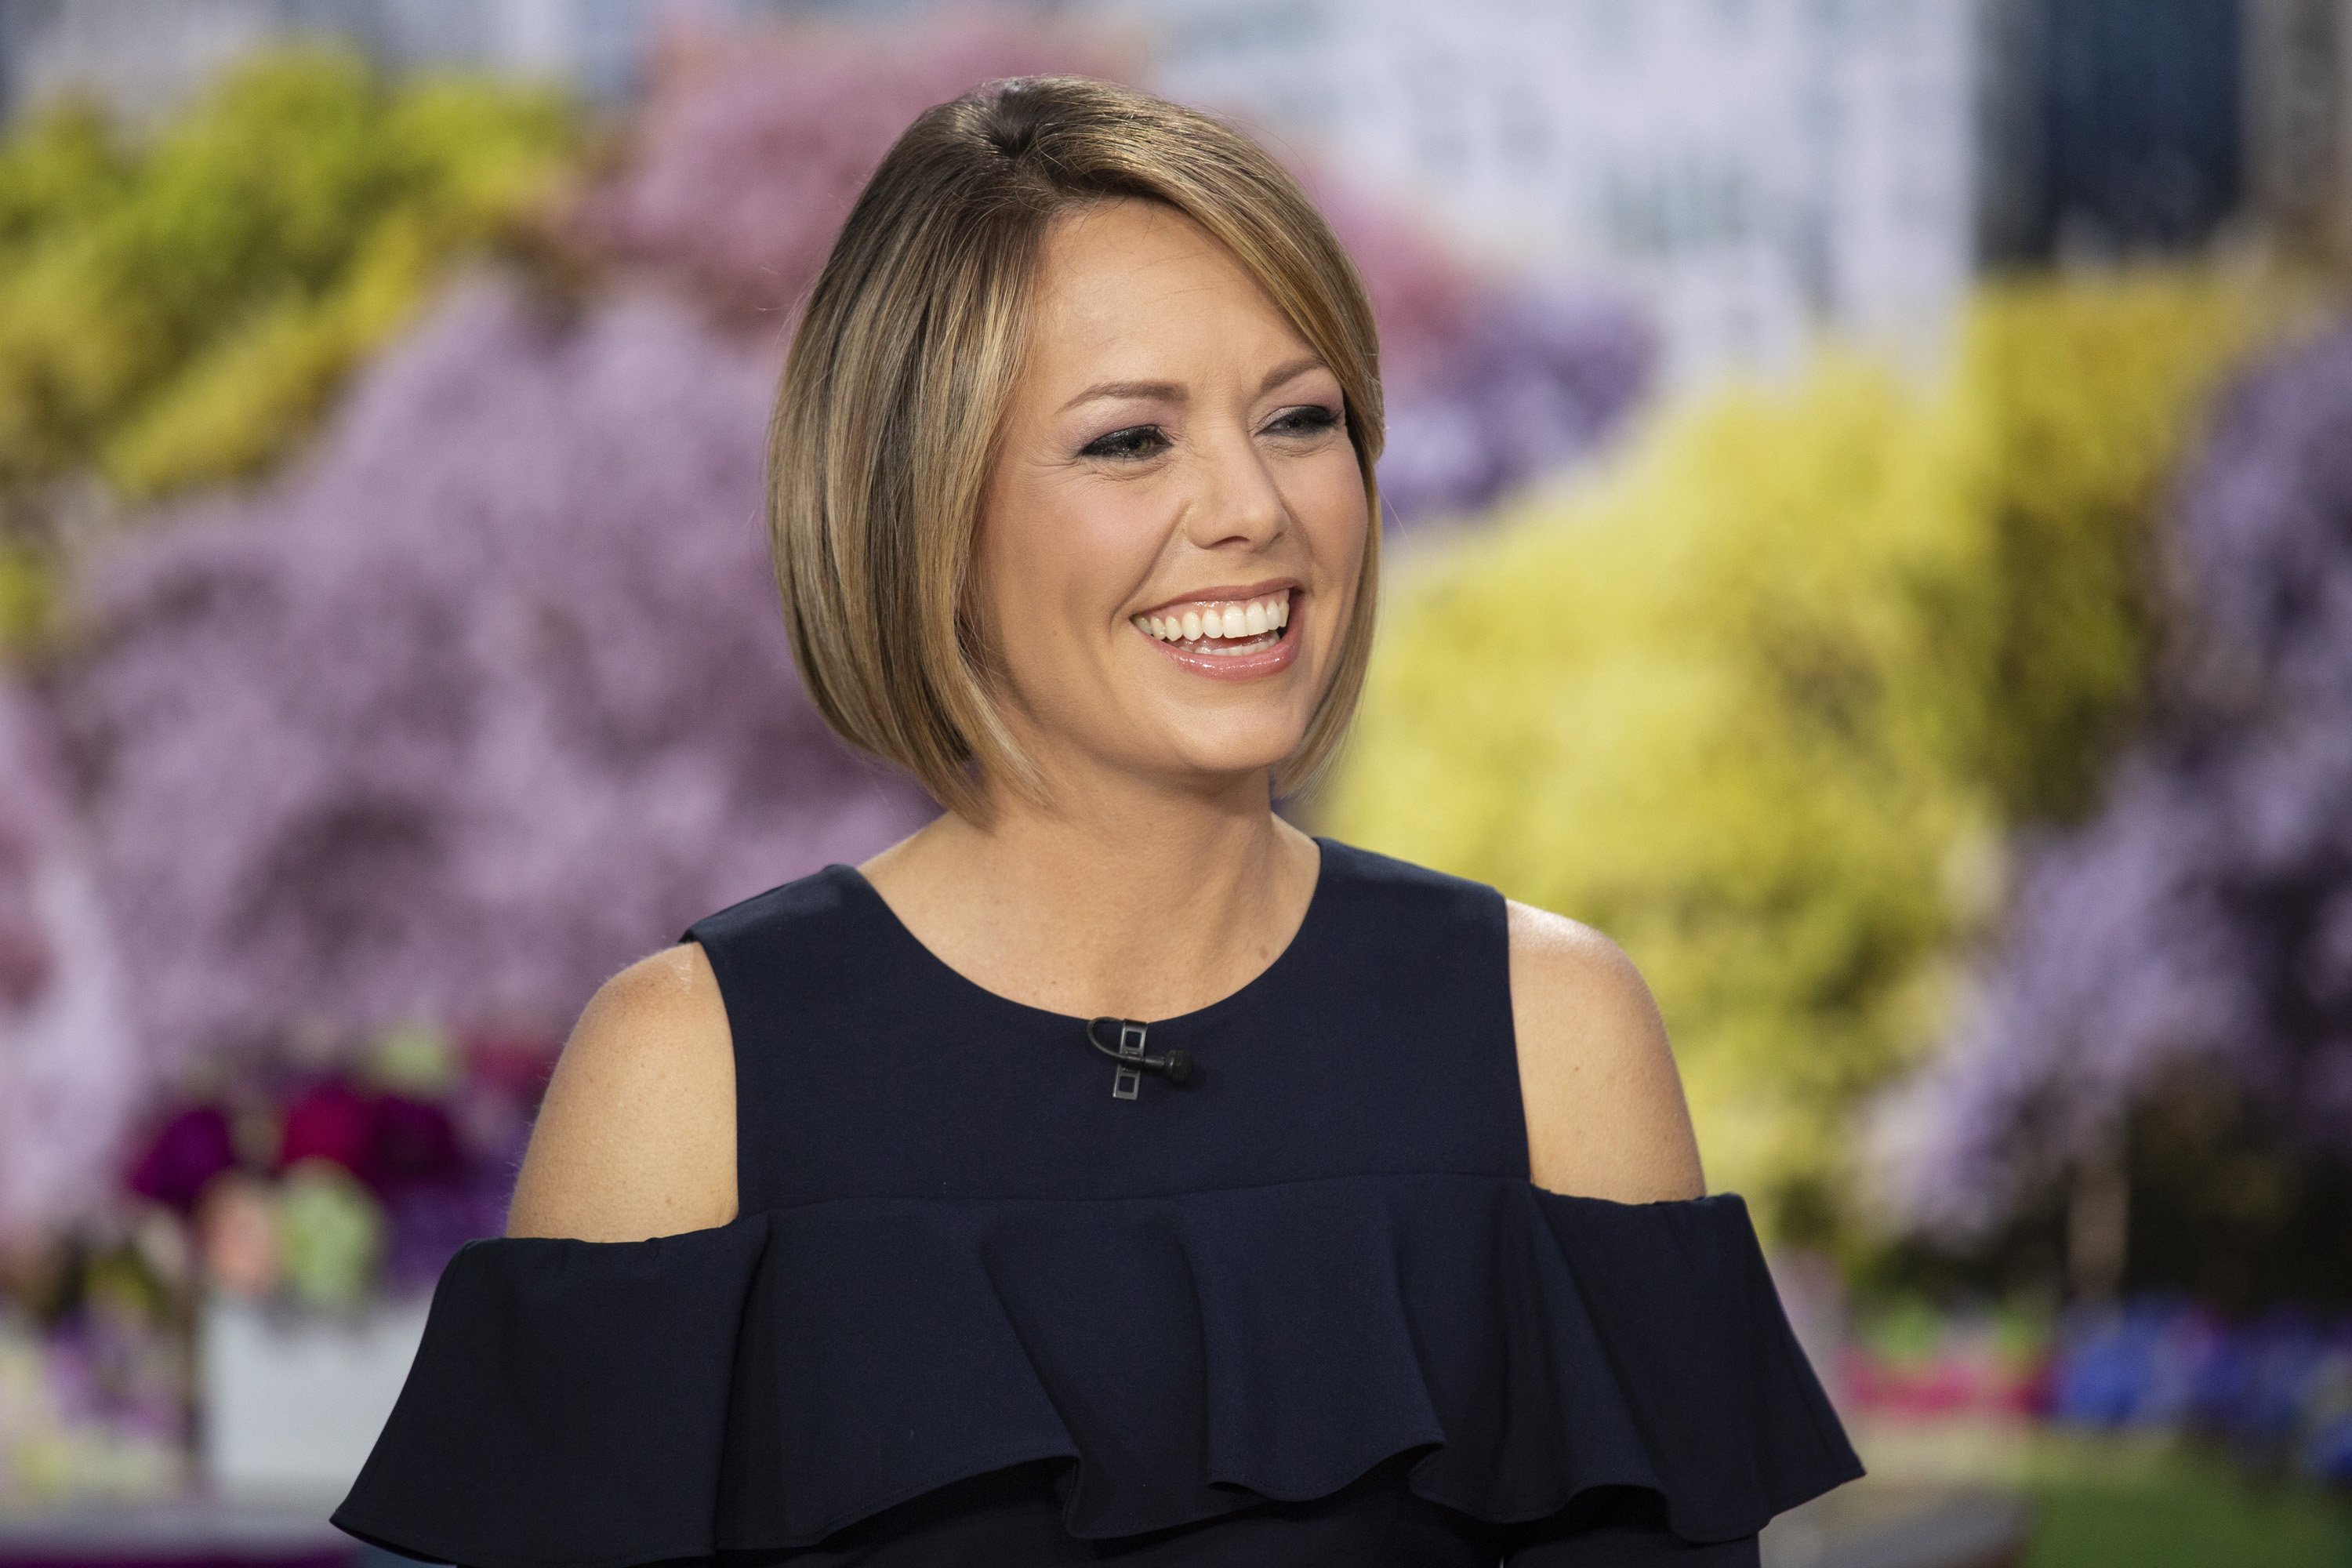 Dylan Dreyer pictured on the "TODAY" show on Tuesday May 14, 2019. | Source: Getty Images.